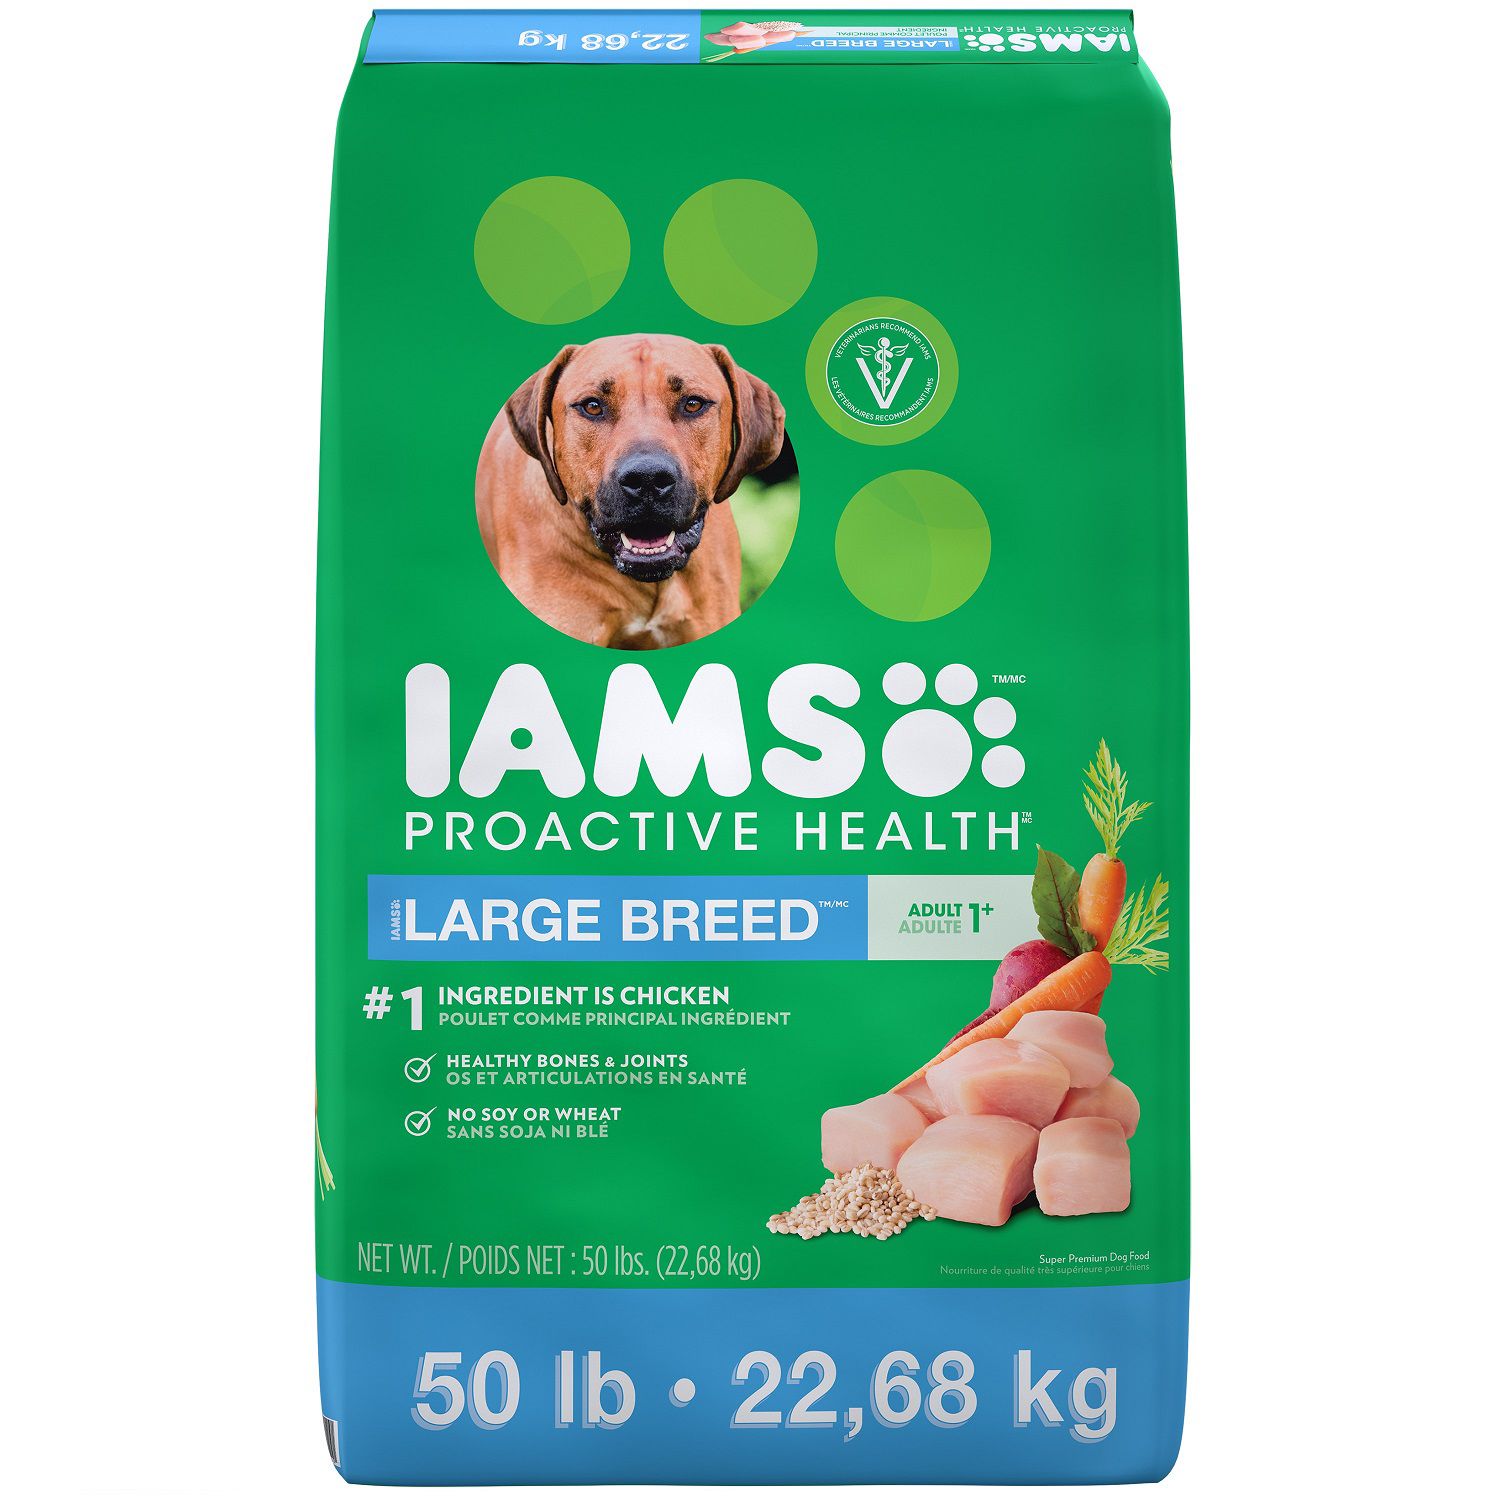 IAMS PROACTIVE HEALTH Large Breed Adult Dry Dog Food - Chicken (50 Lb)